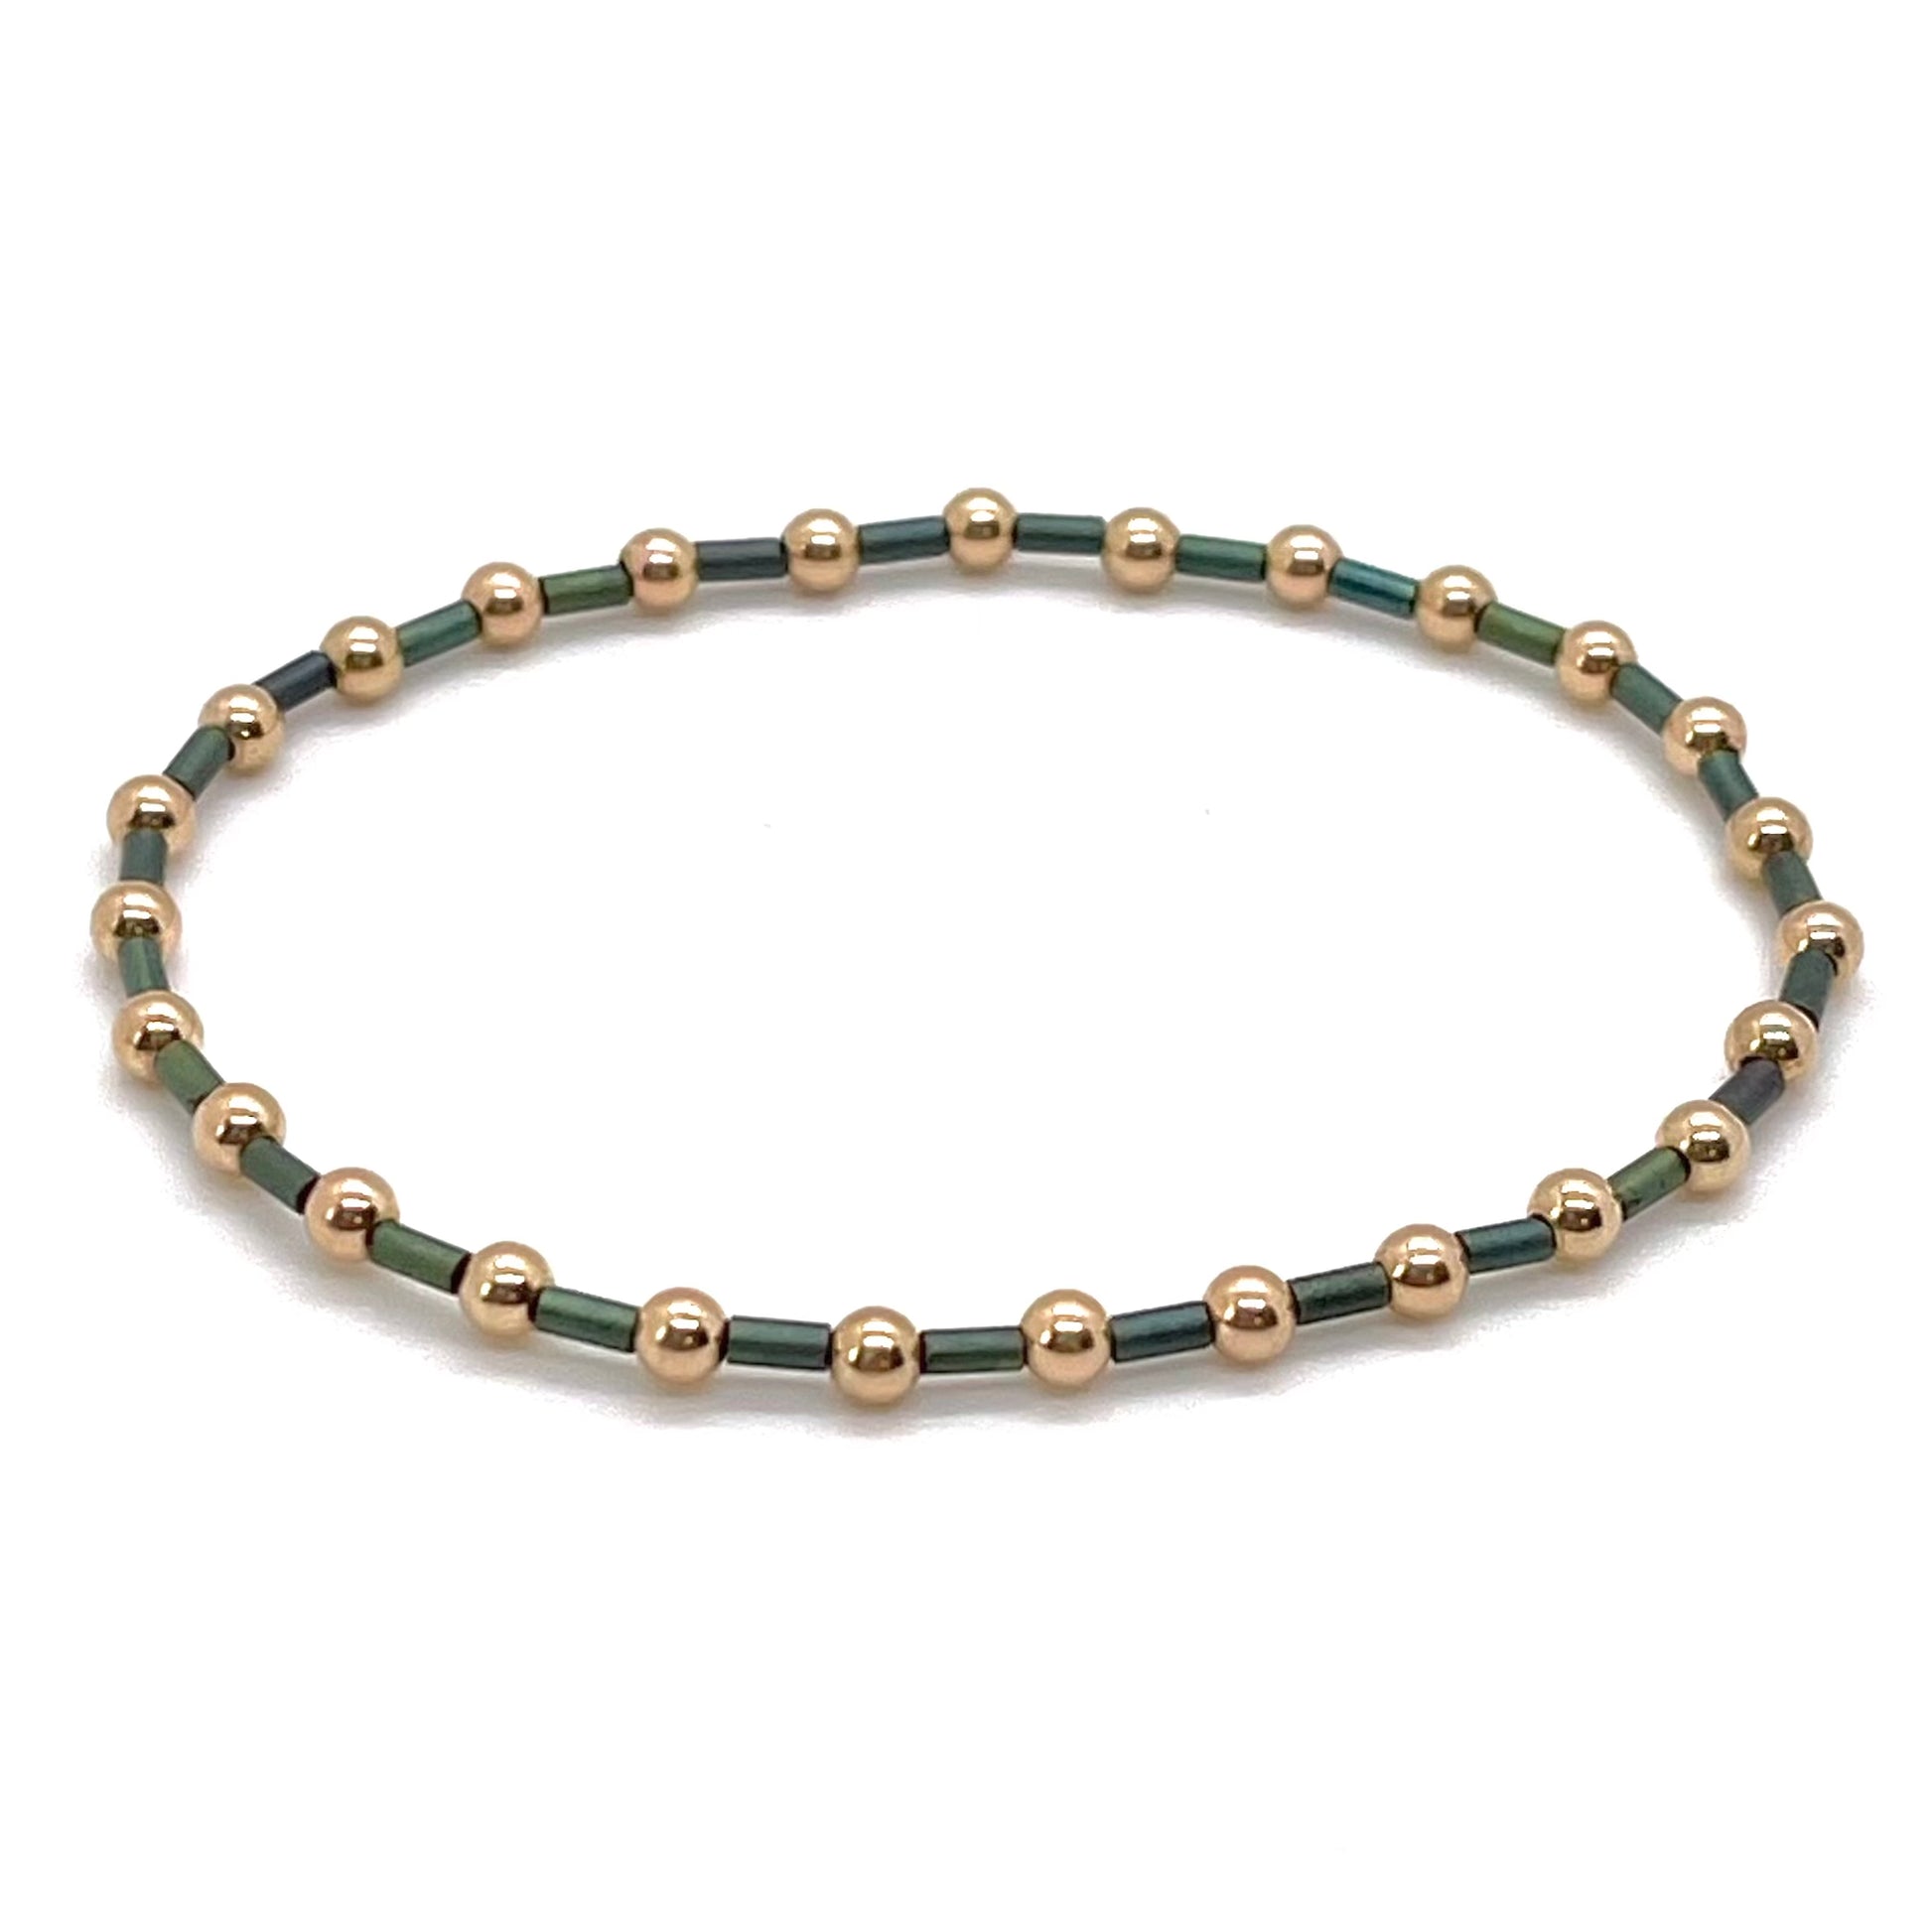 Green bugle bead dainty stretch bracelet with 3mm 14K rose gold filled beads. Waterproof and tarnish resistant.